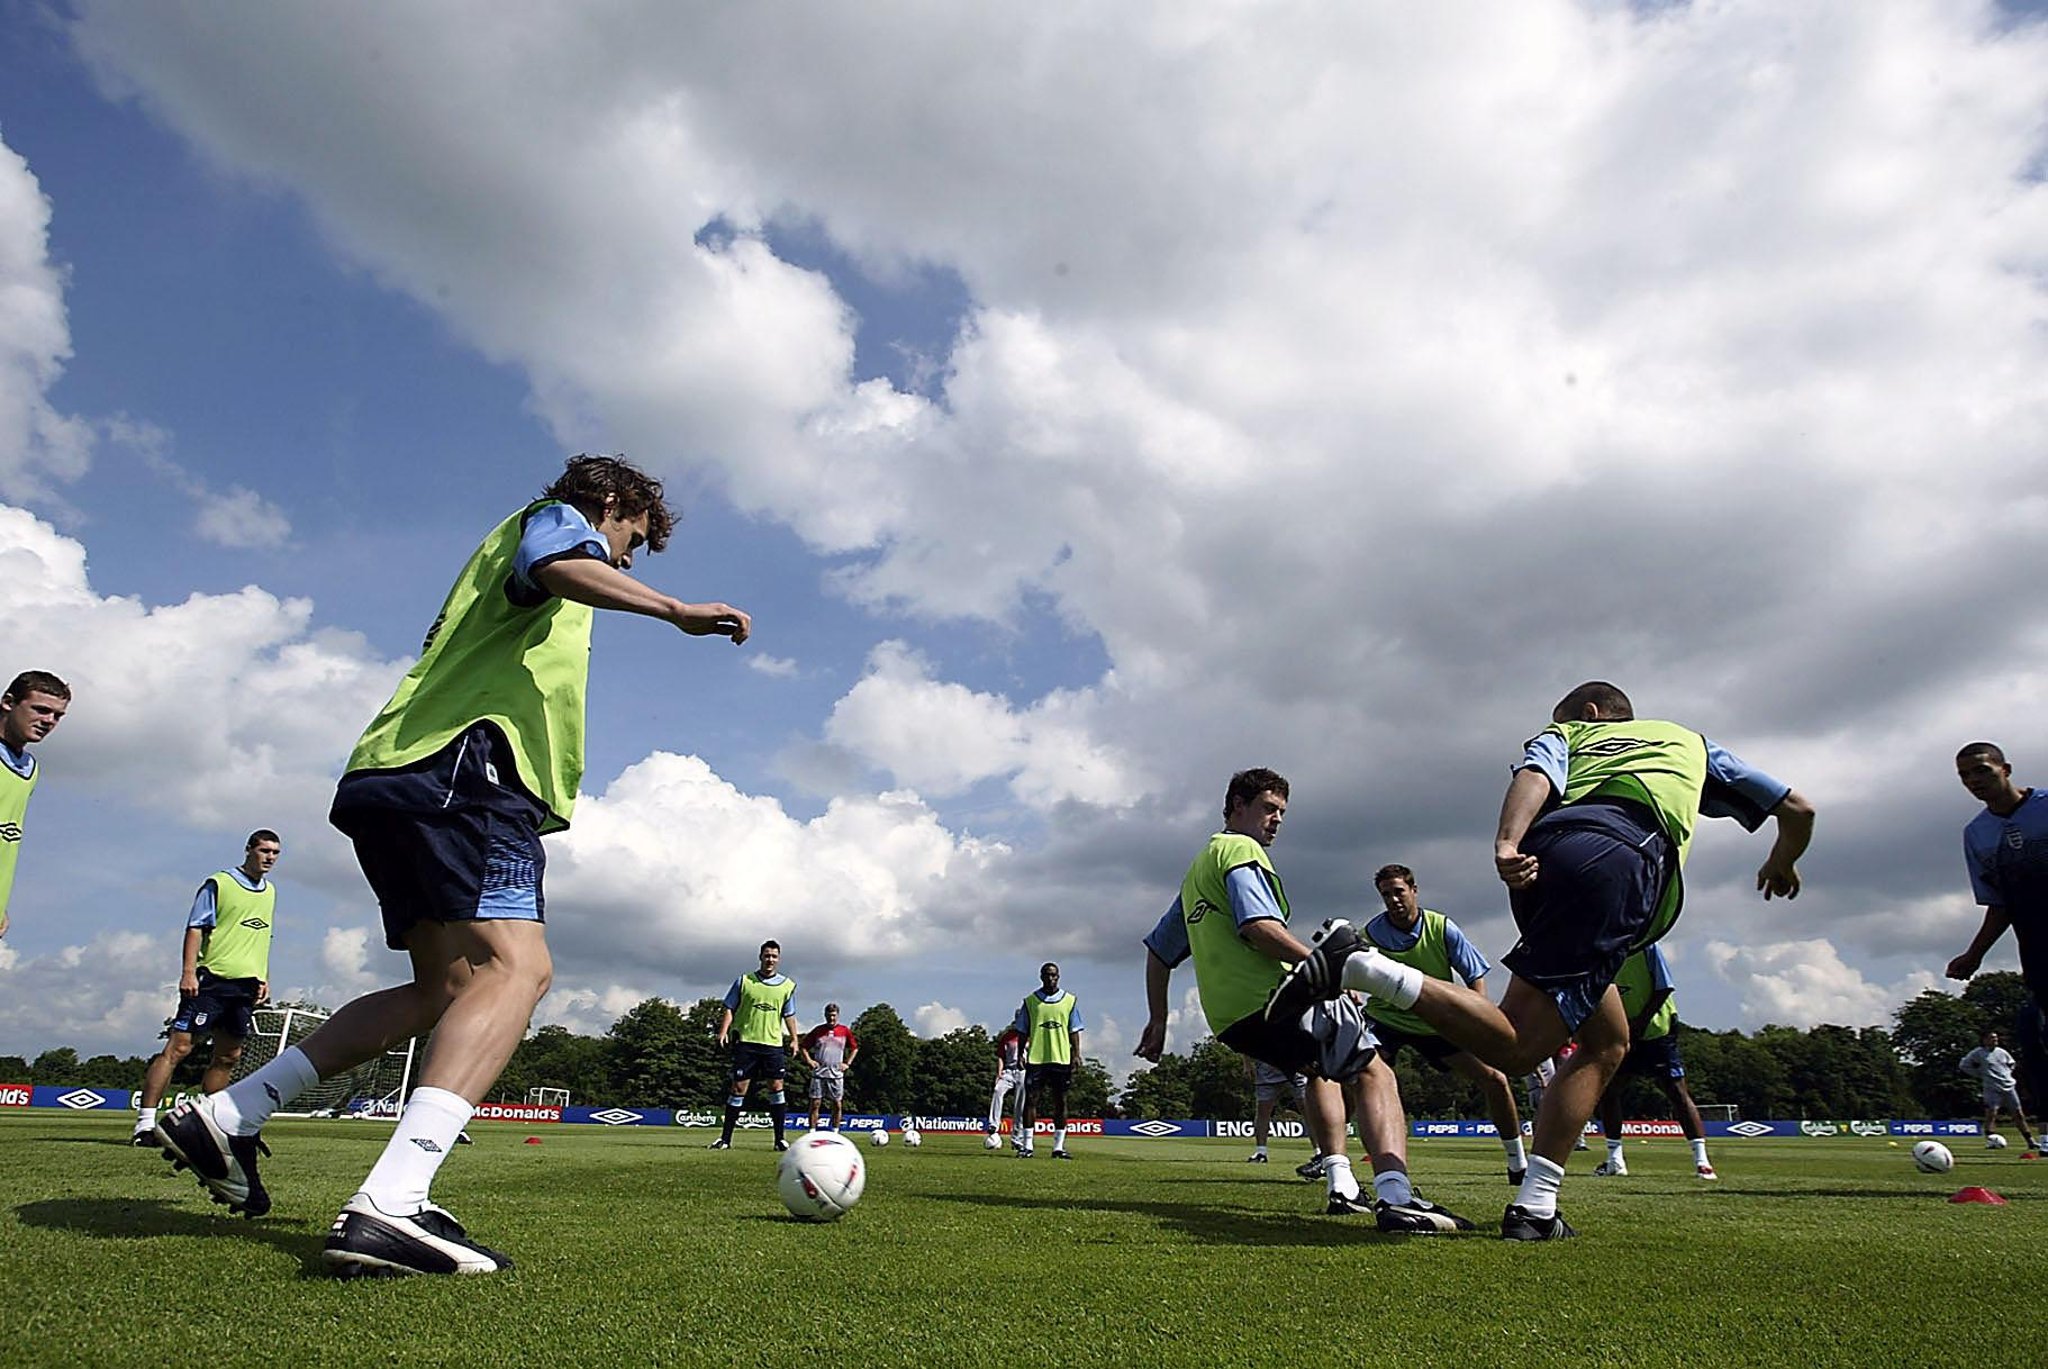 Scotland Announce English Base Plan For Euro And Spanish Pre Tournament Camp The Scotsman